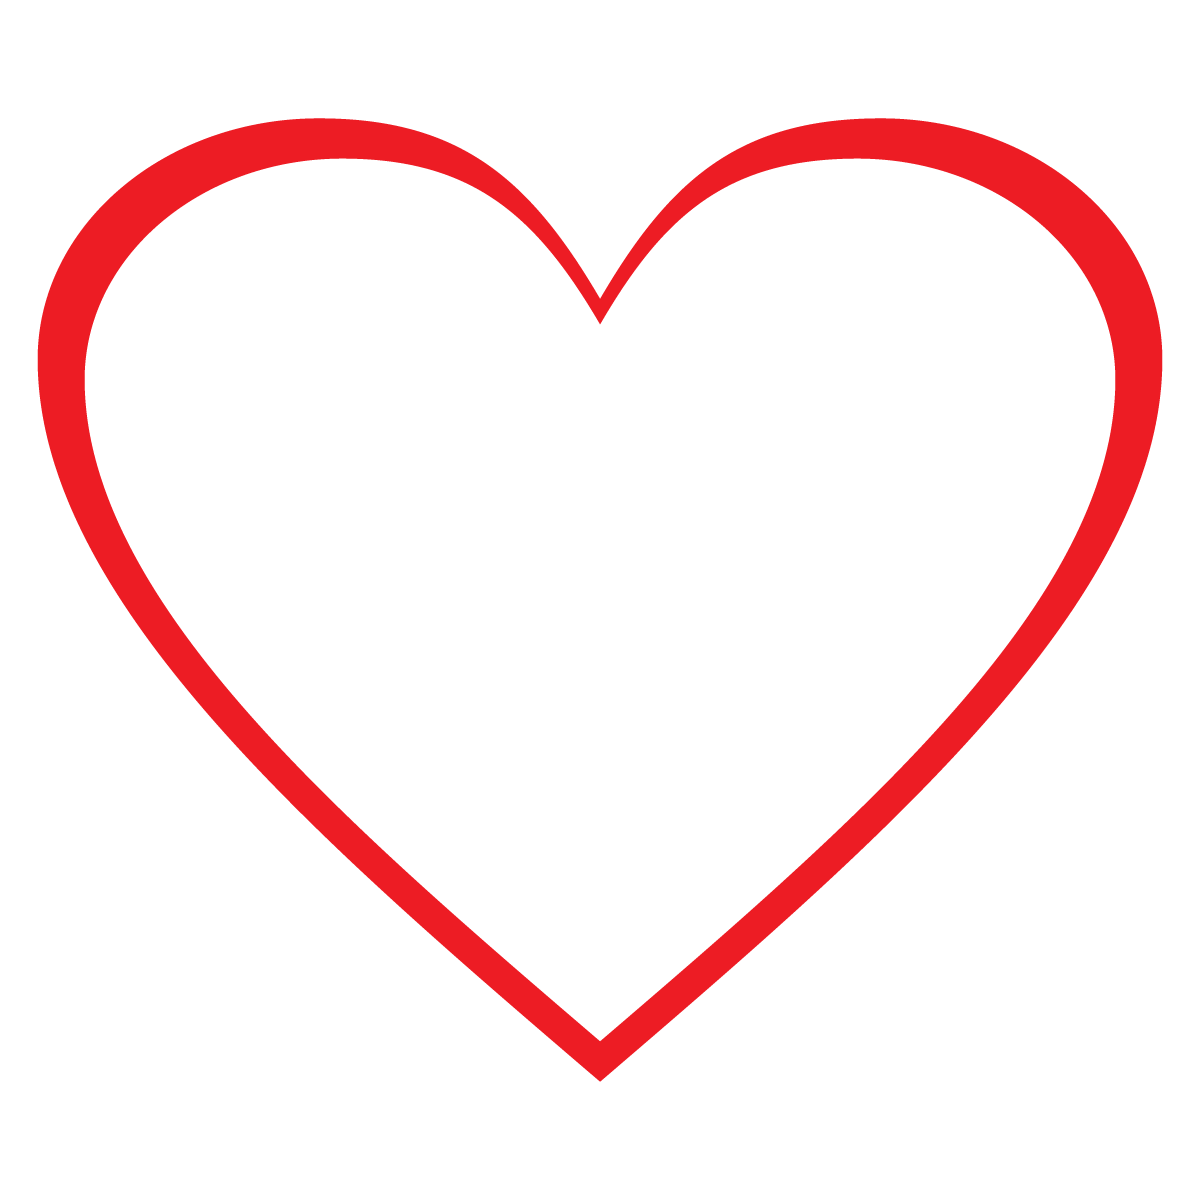 Picture Vector Love Artwork PNG Image High Quality PNG Image